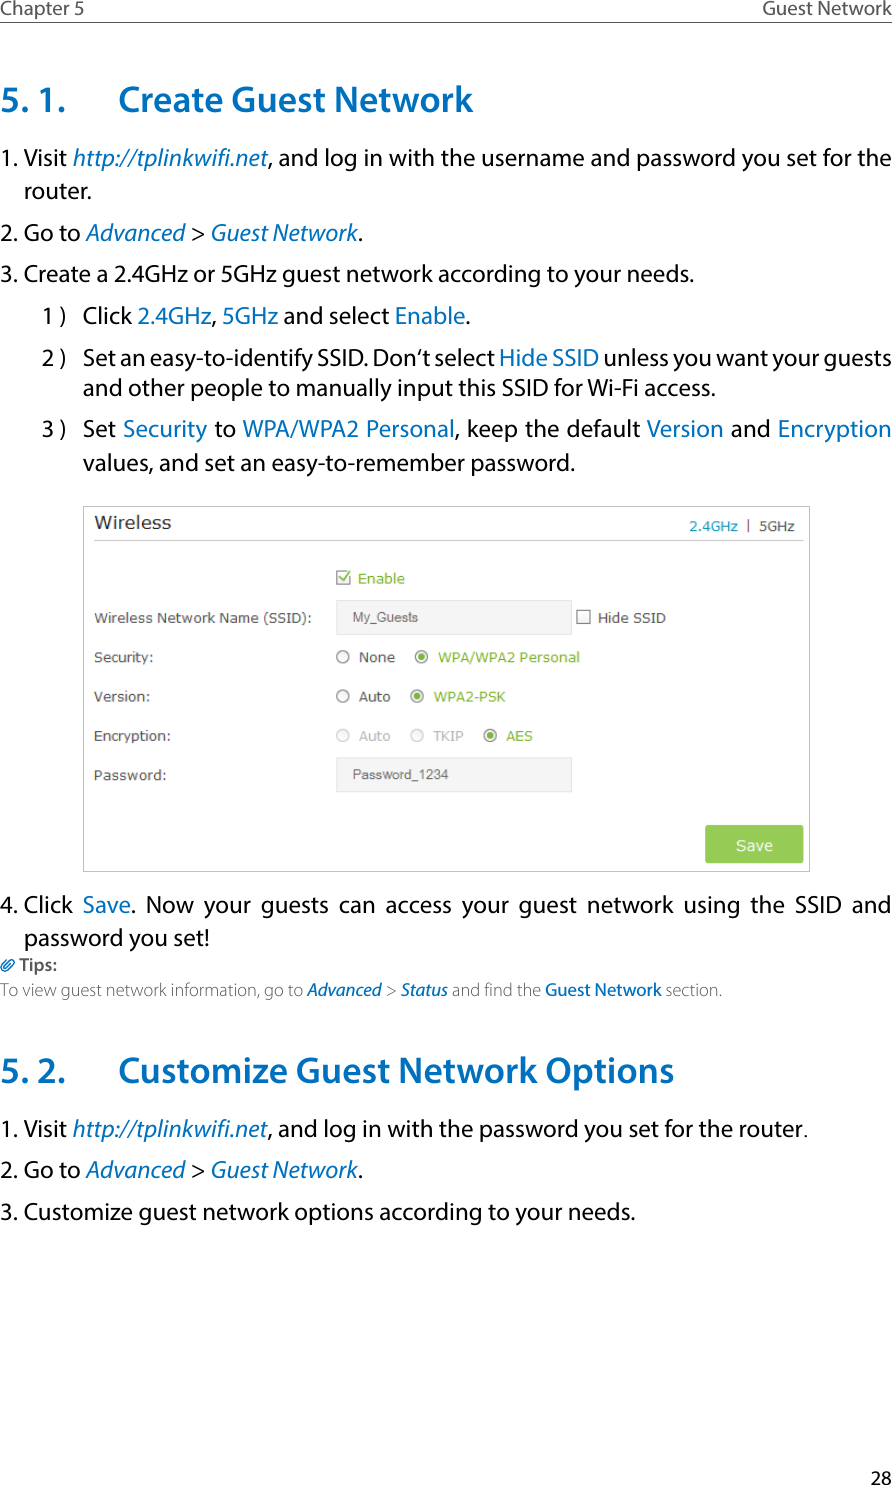 28Chapter 5 Guest Network5. 1.  Create Guest Network 1. Visit http://tplinkwifi.net, and log in with the username and password you set for the router.2. Go to Advanced &gt; Guest Network.3. Create a 2.4GHz or 5GHz guest network according to your needs.1 )  Click 2.4GHz, 5GHz and select Enable.2 )  Set an easy-to-identify SSID. Don‘t select Hide SSID unless you want your guests and other people to manually input this SSID for Wi-Fi access.3 )  Set Security to WPA/WPA2 Personal, keep the default Version and Encryption values, and set an easy-to-remember password.4. Click  Save. Now your guests can access your guest network using the SSID and password you set!Tips:To view guest network information, go to Advanced &gt; Status and find the Guest Network section.5. 2.  Customize Guest Network Options1. Visit http://tplinkwifi.net, and log in with the password you set for the router.2. Go to Advanced &gt; Guest Network.3. Customize guest network options according to your needs.